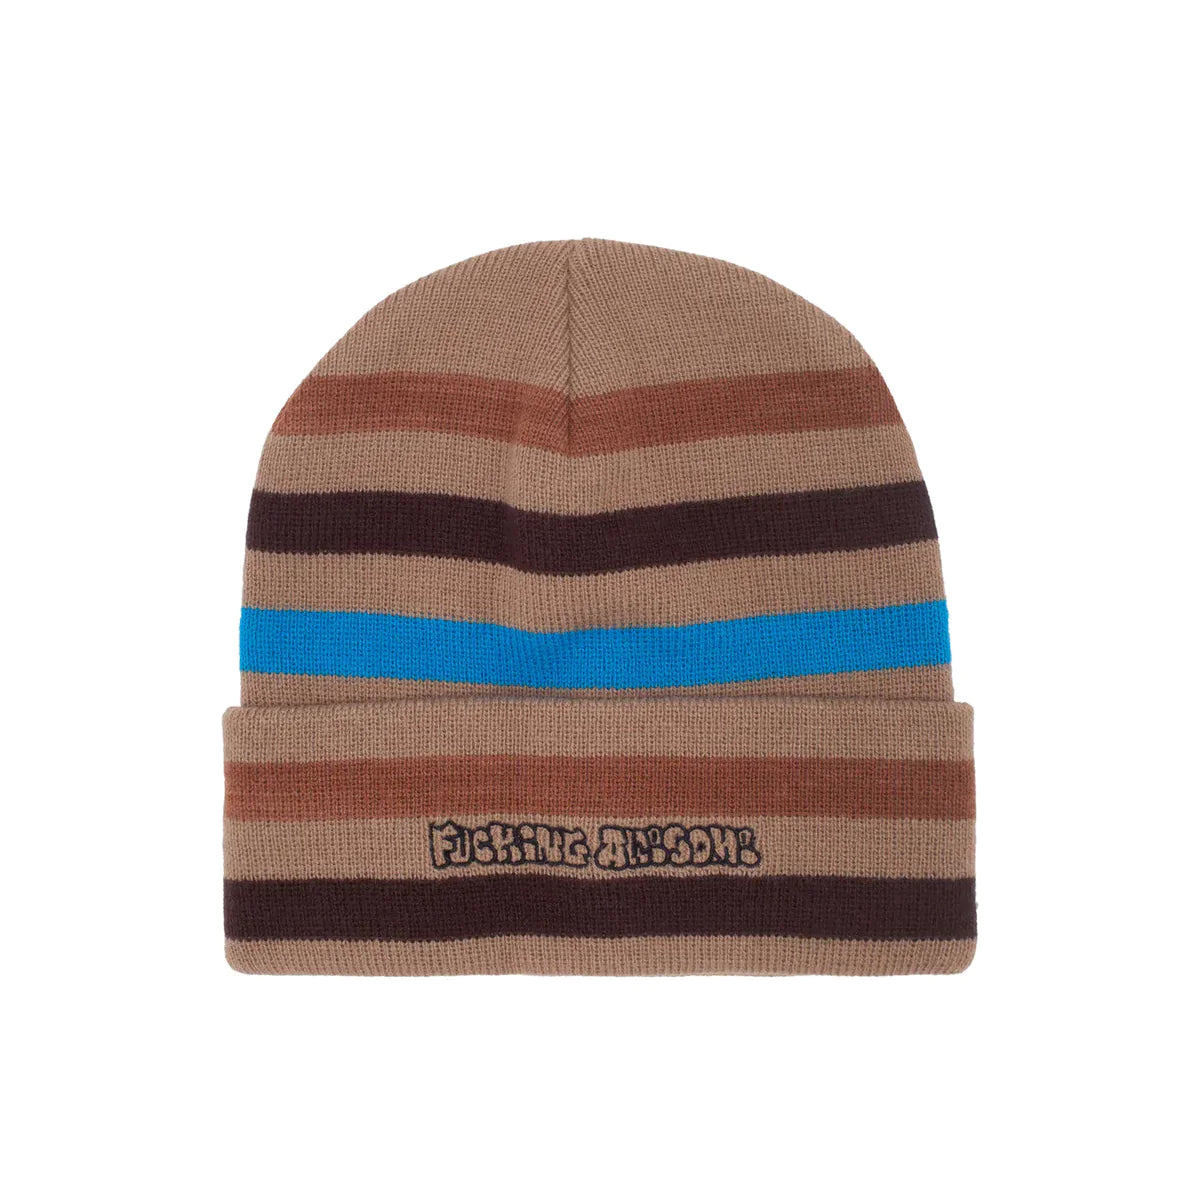 Fucking Awesome - Wanto Striped Cuff Beanie - Brown / Multi